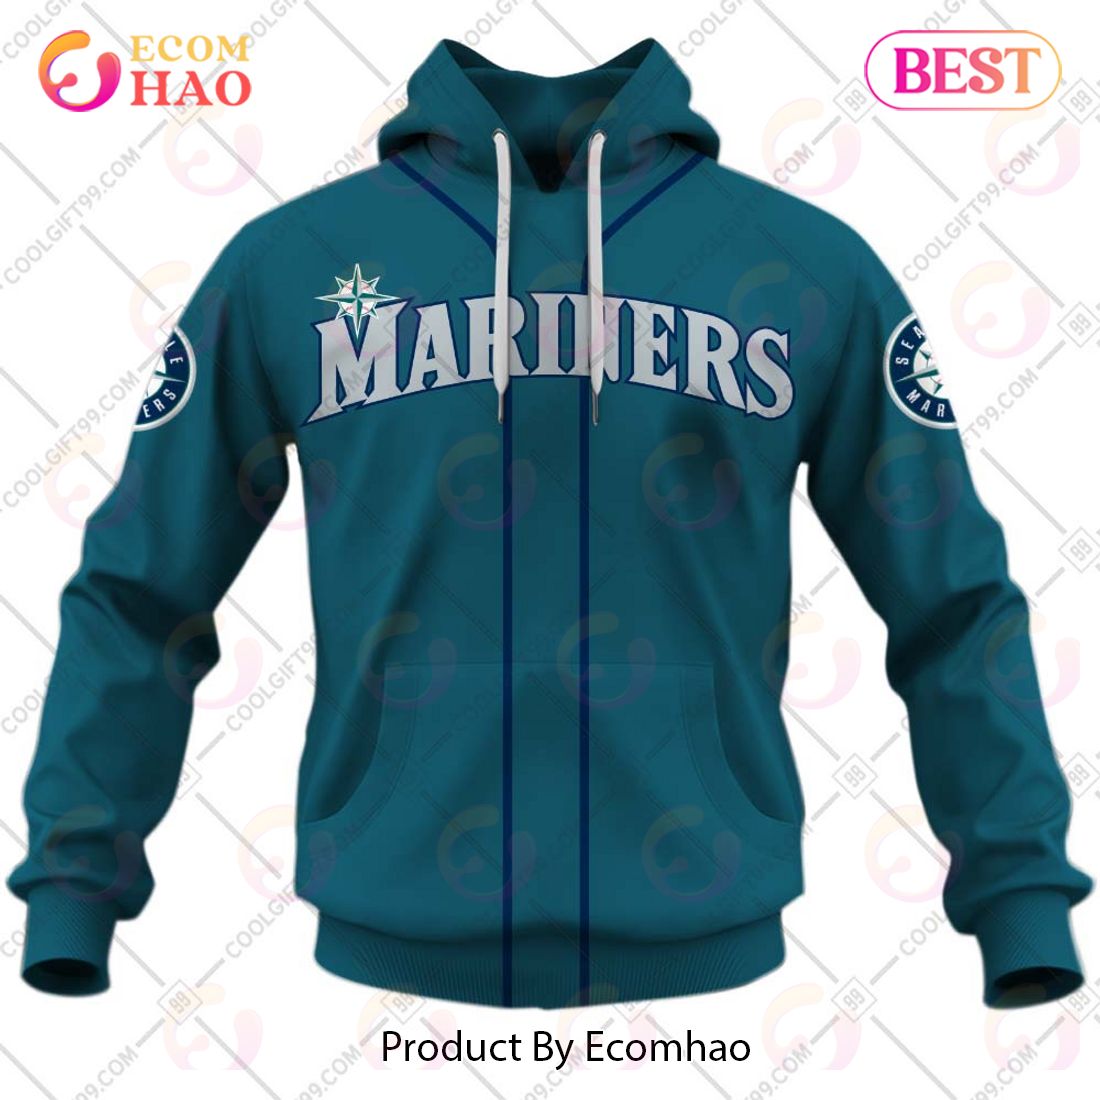 Seattle Mariners MLB Personalized Hunting Camouflage Hoodie T